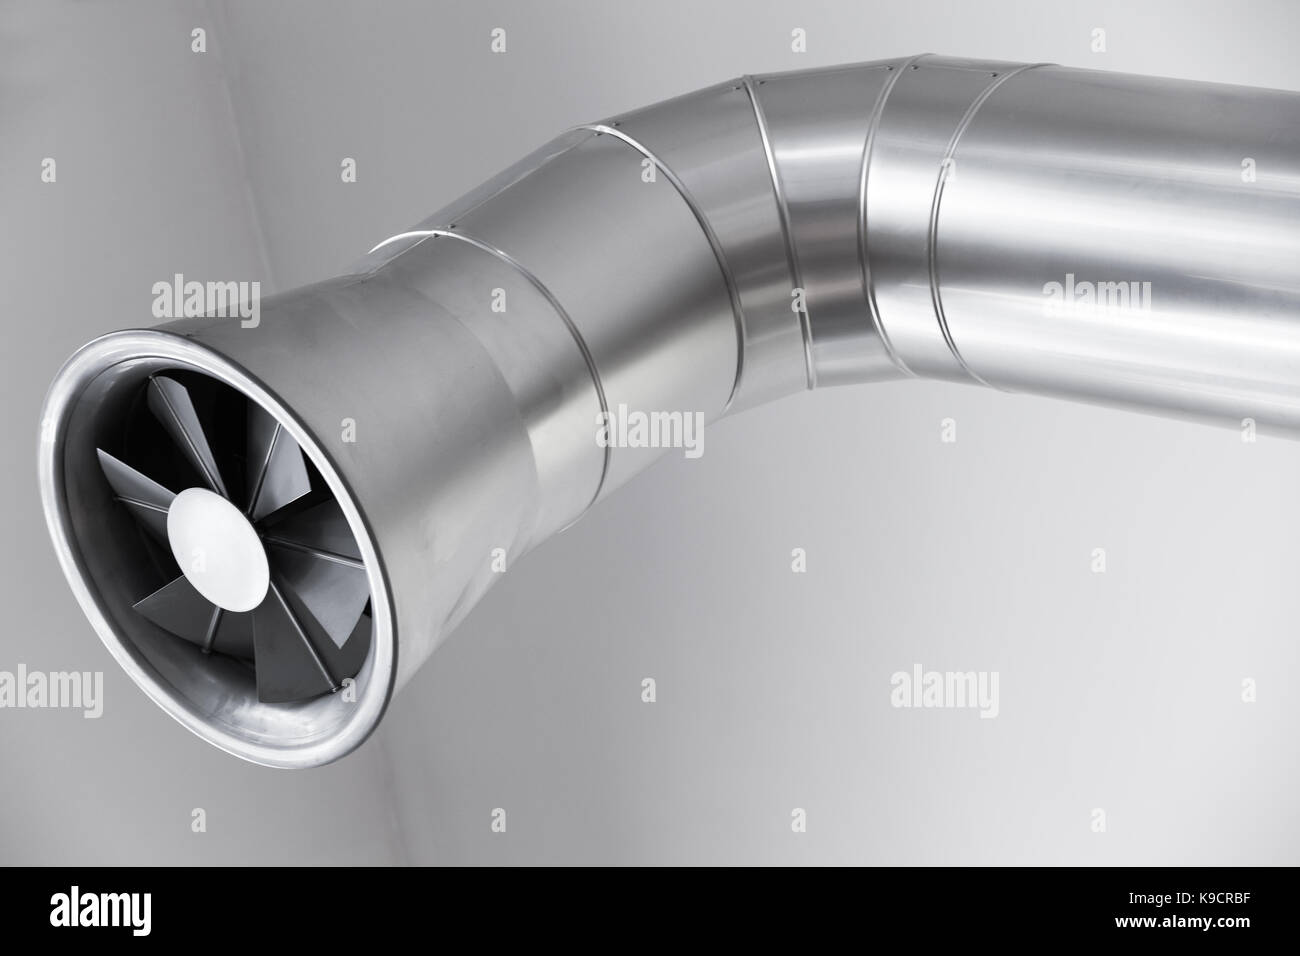 Modern round ventilation fan made of stainless steel Stock Photo